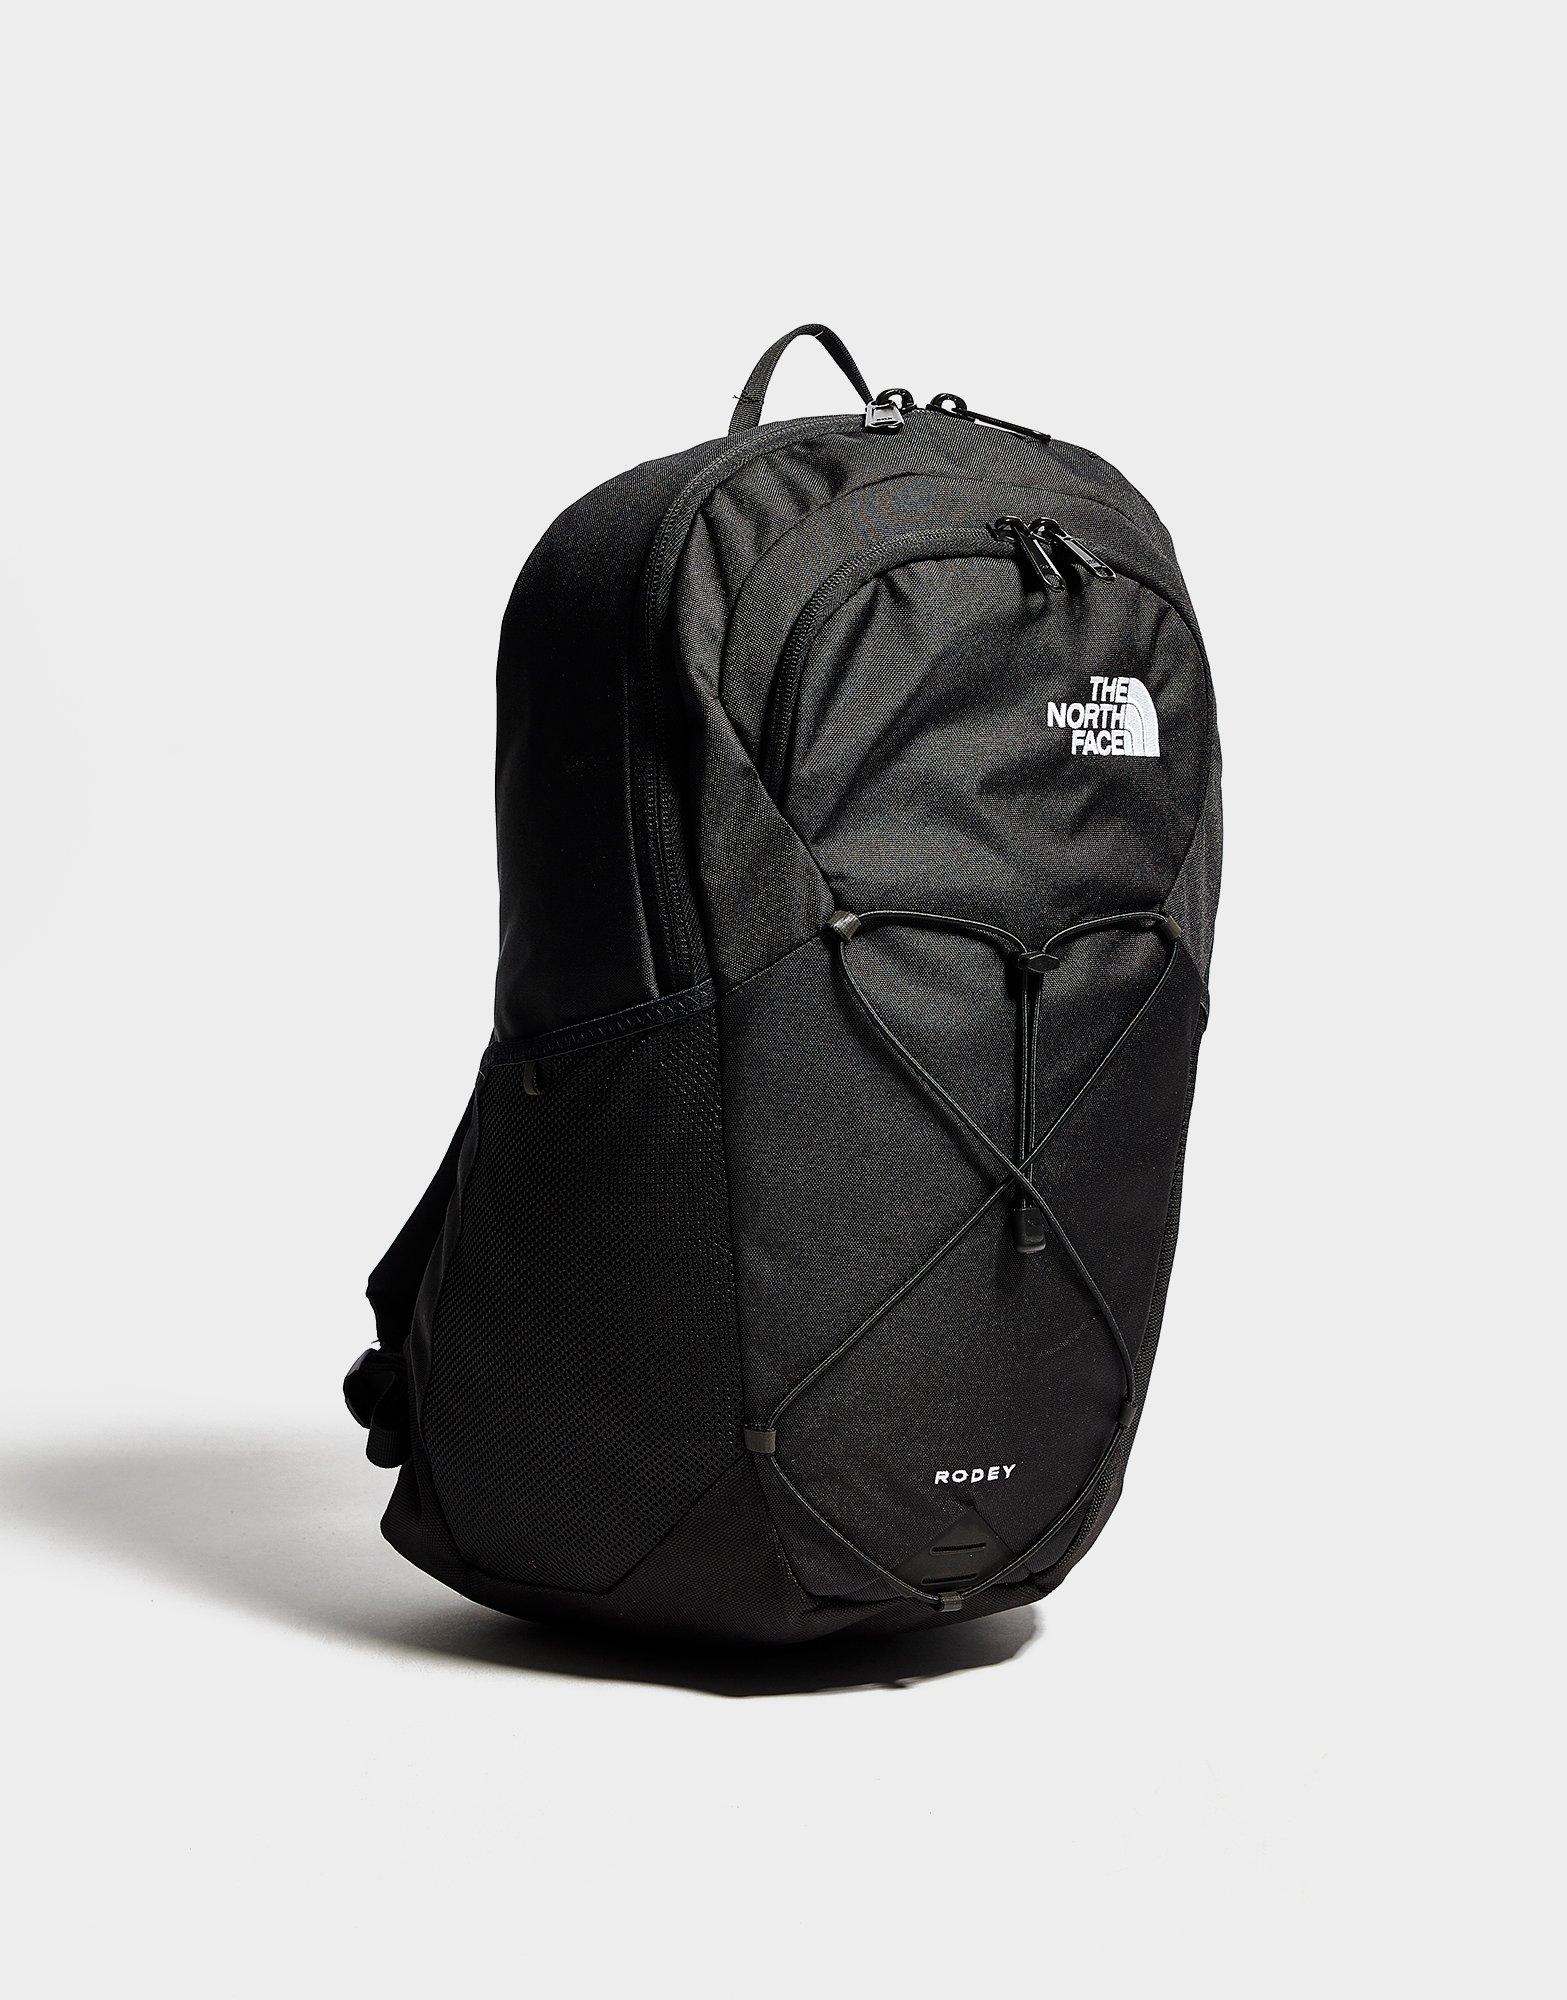 Black The North Face Rodey Backpack 